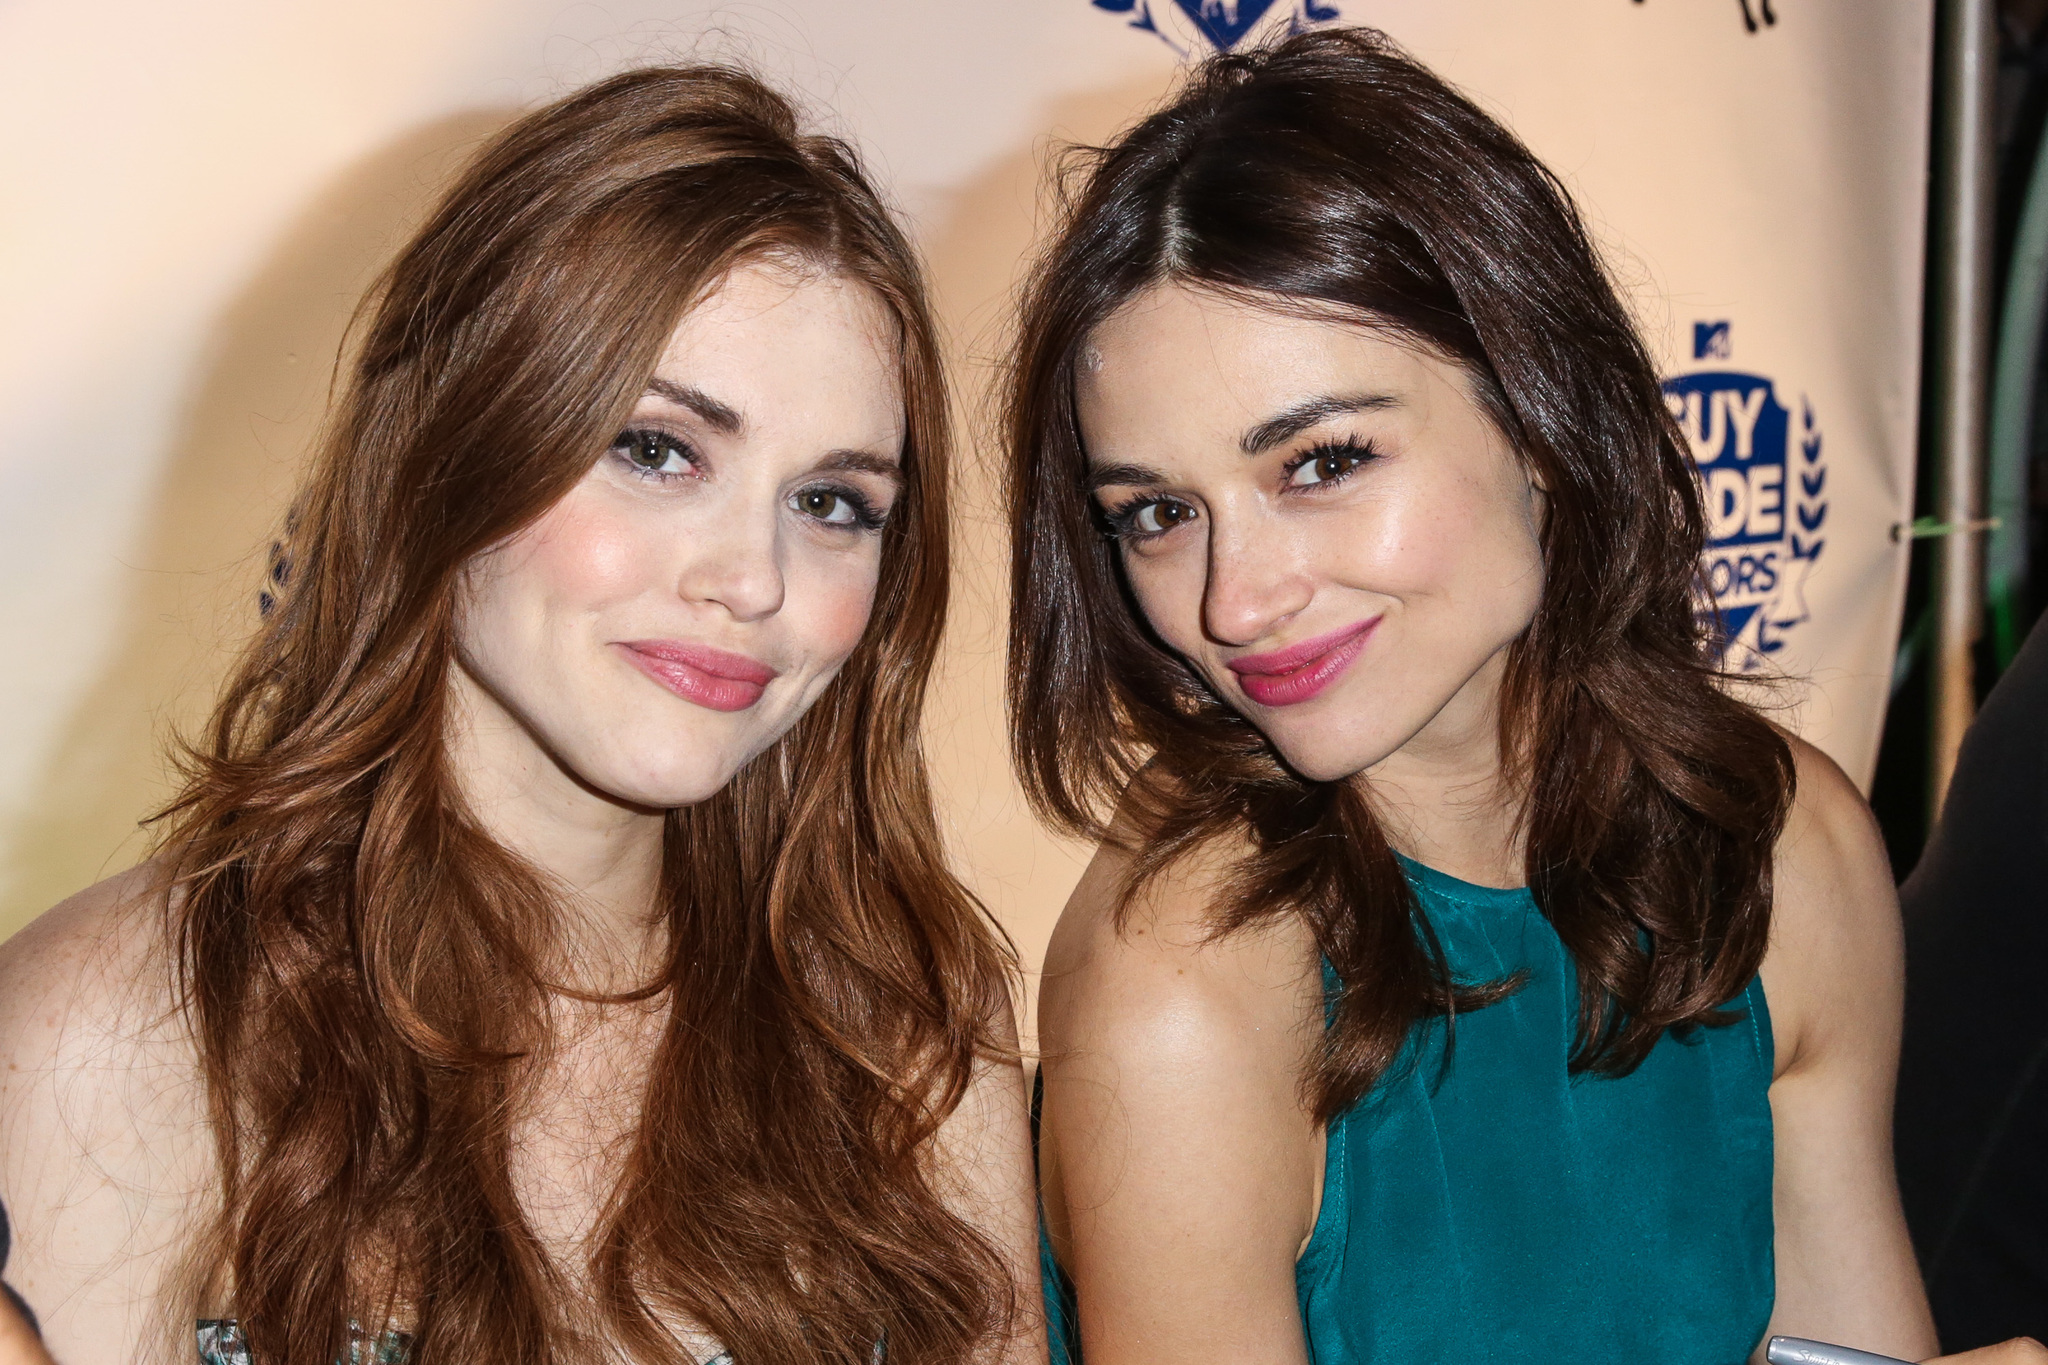 Holland Roden and Crystal Reed